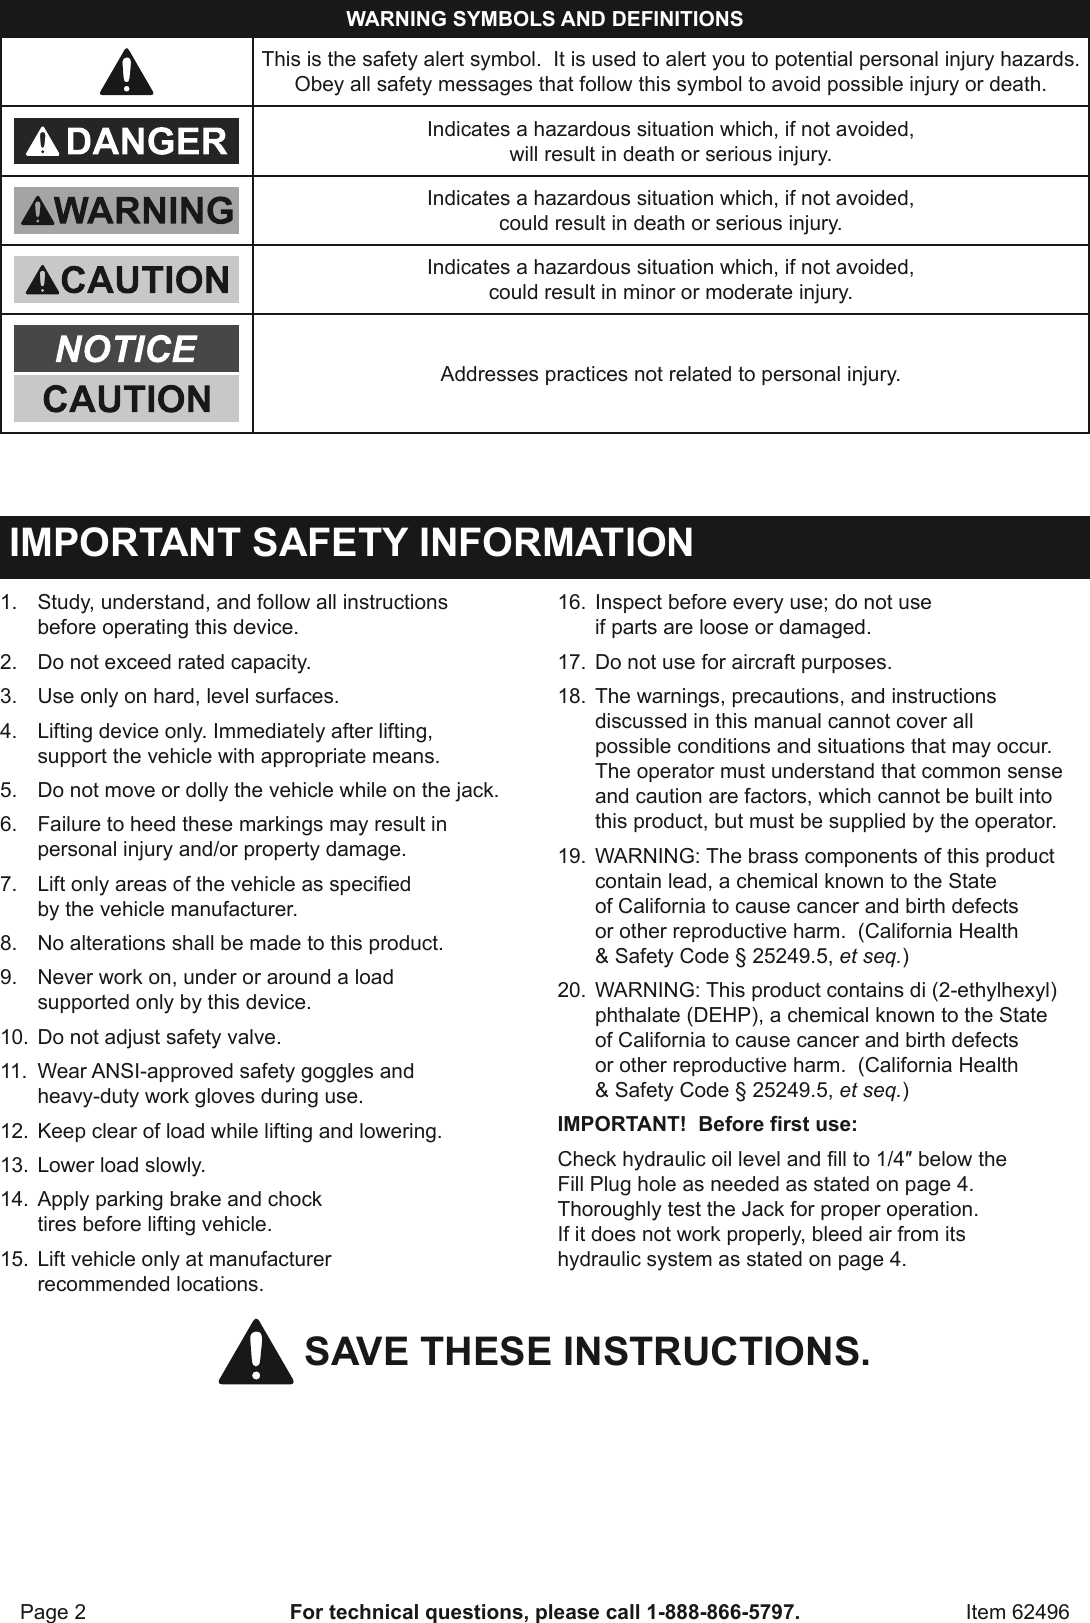 Page 2 of 8 - Manual For The 62496 1.5 Ton Compact Aluminum Racing Floor Jack With Rapid Pump®